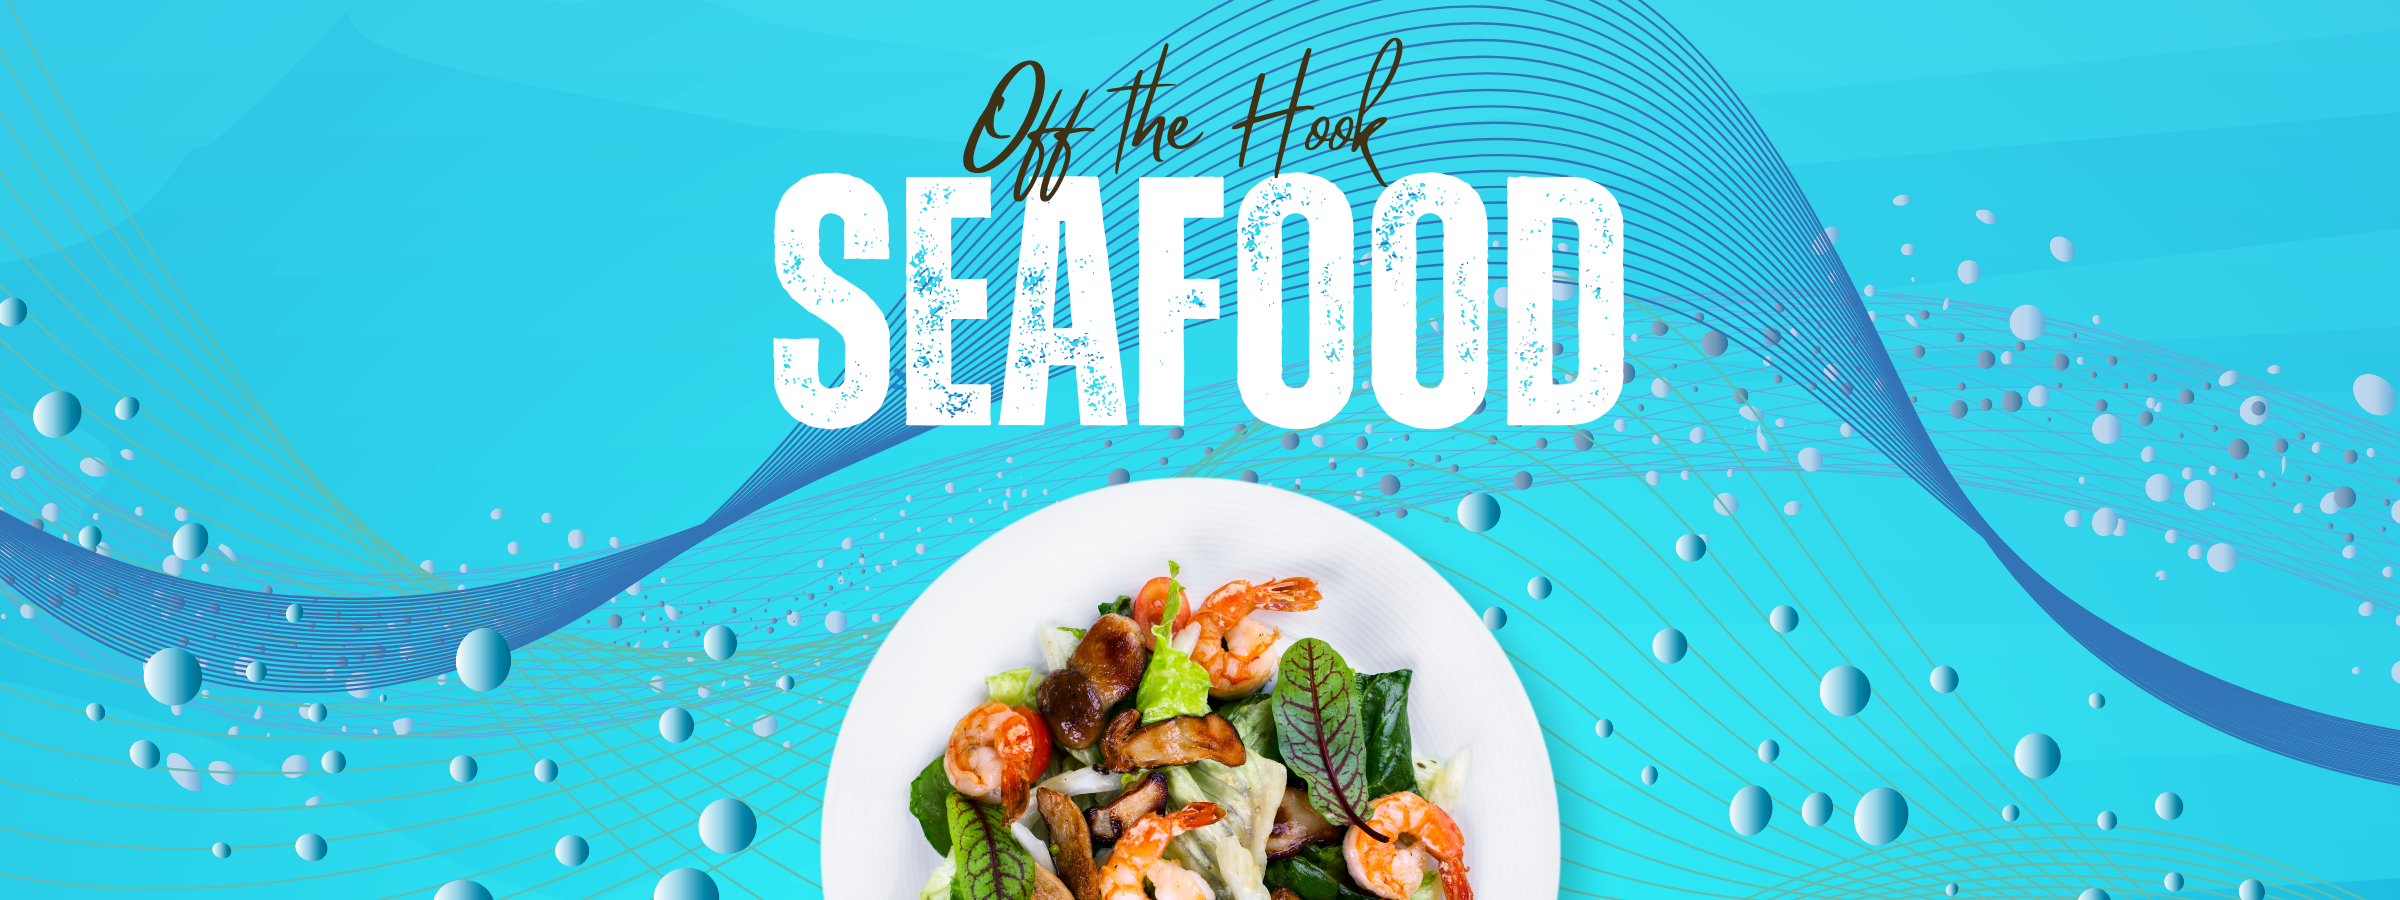 off the hook seafood